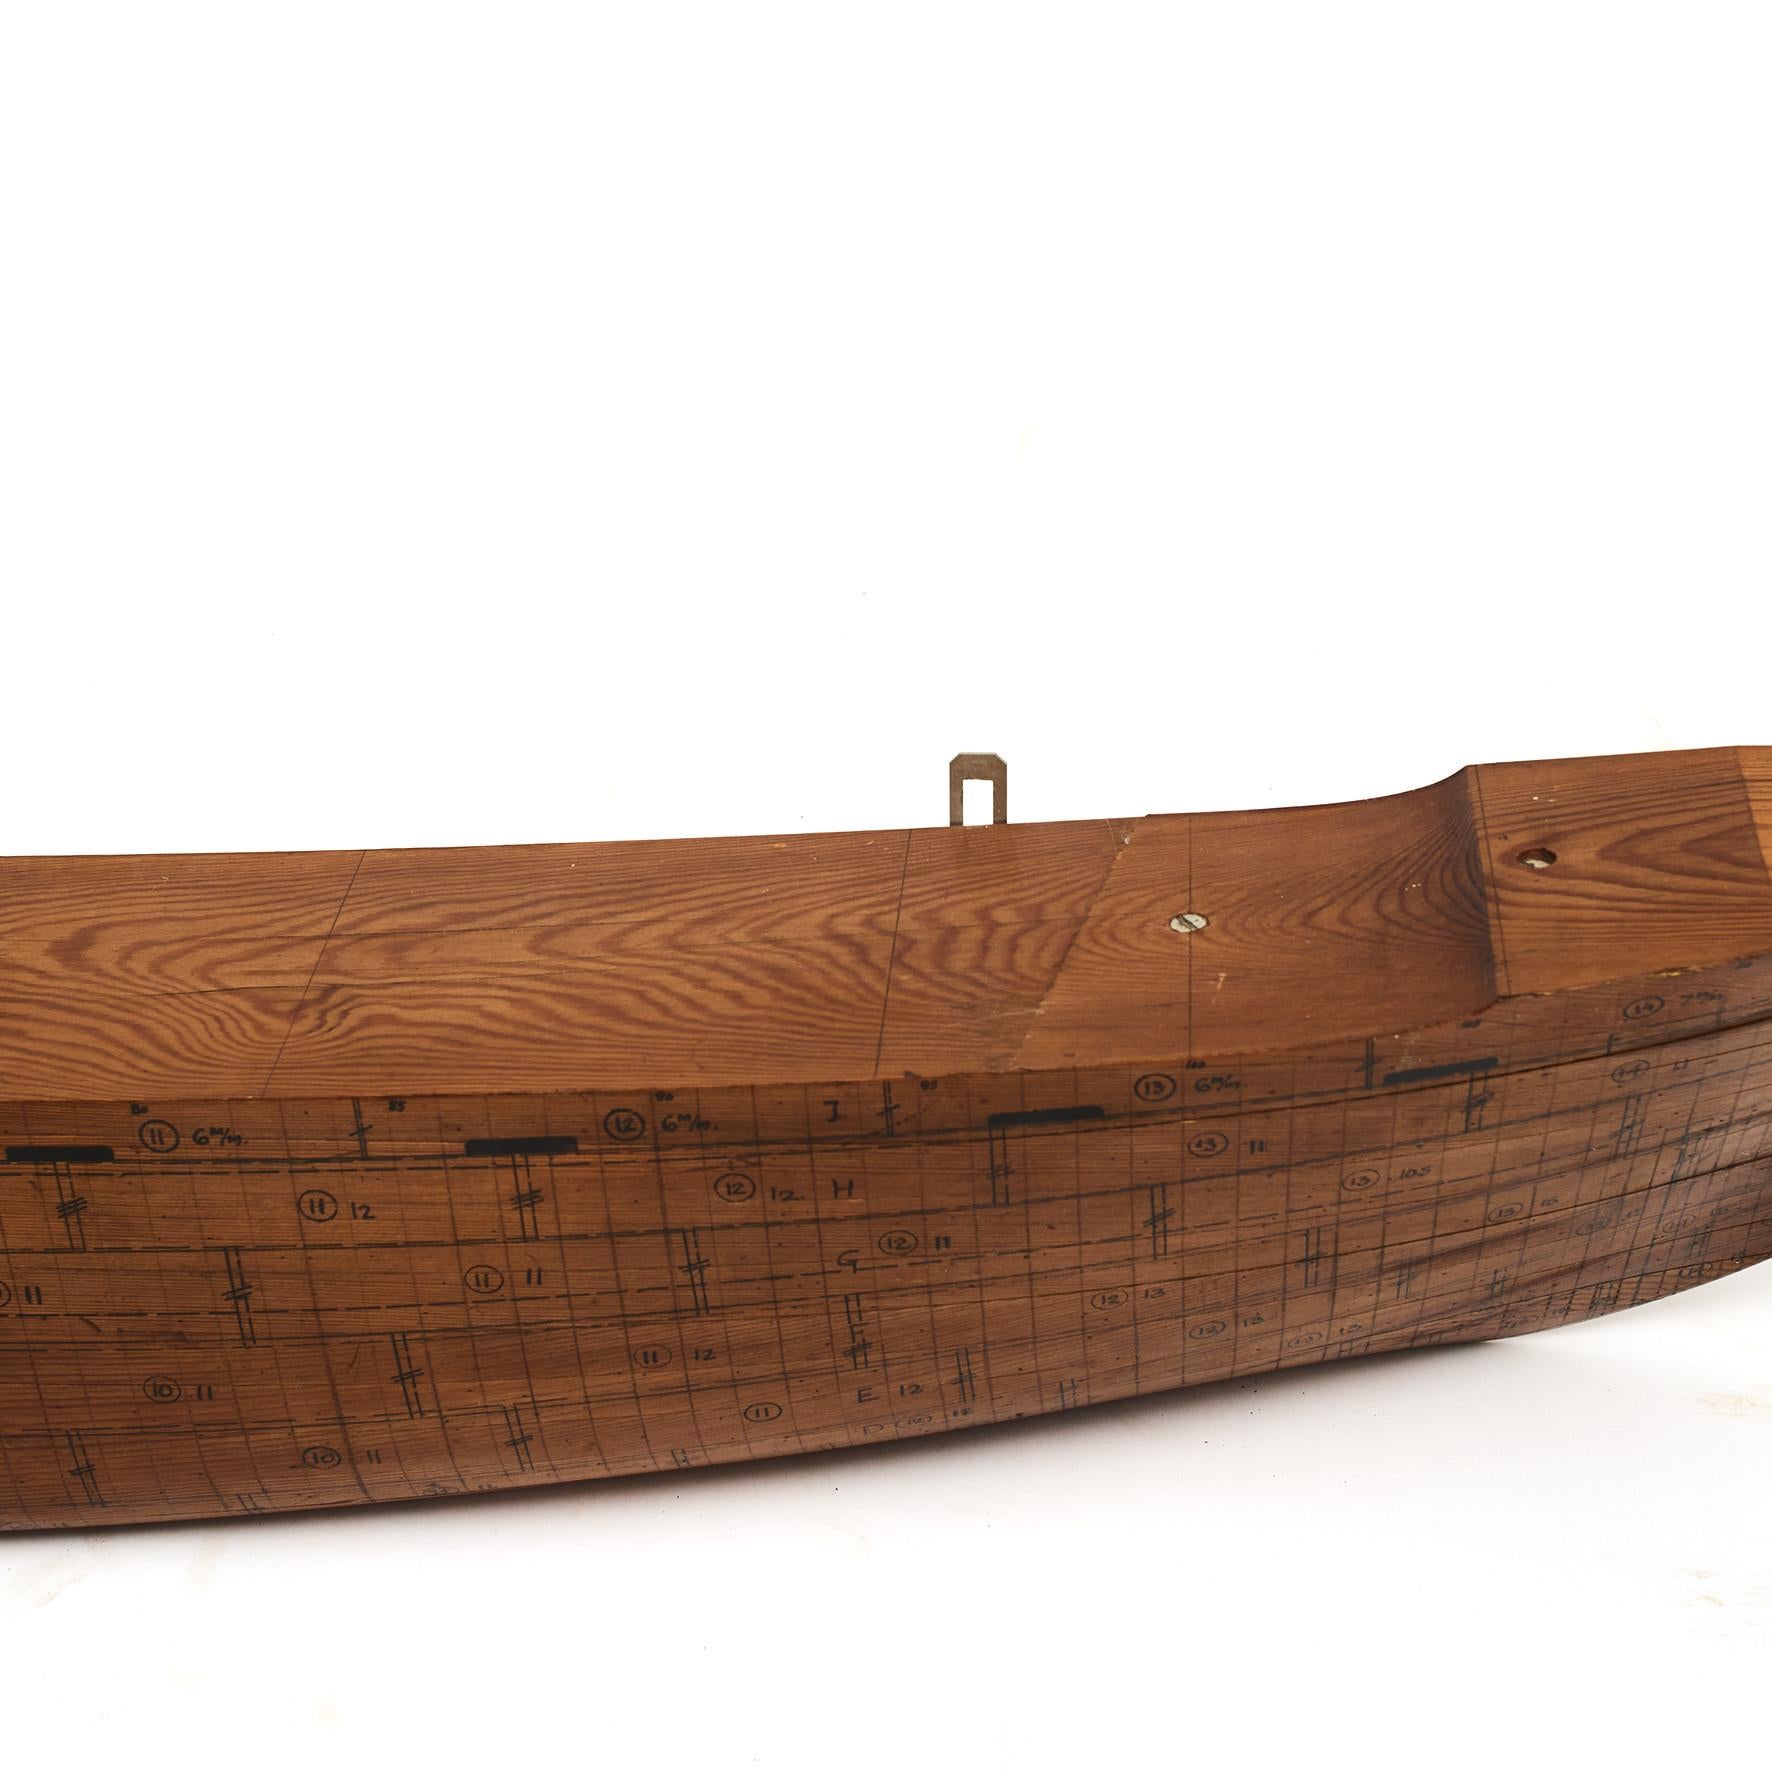 Large Danish shipbuilder's half hull model.
Constructed in pine wood annotated with construction details.
From Danish shipyard, c. 1920s-1930s.
Untouched original condition, good patina.